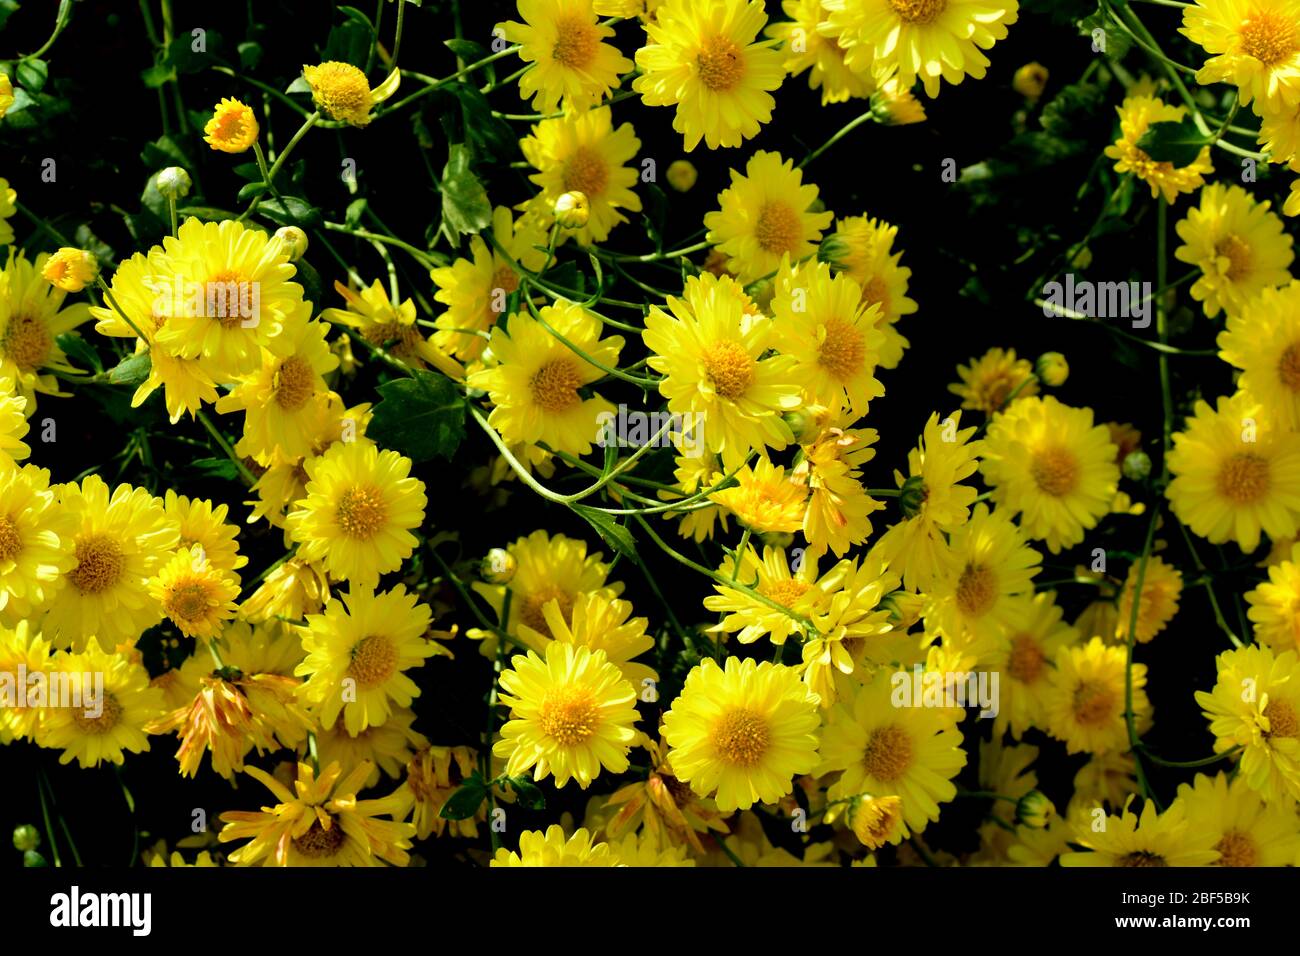 Chrysanthemum morifolium Ramat is a perennial herb covered with yellow villous hairs, cultivated in many areas in China for medicinal and food applica Stock Photo